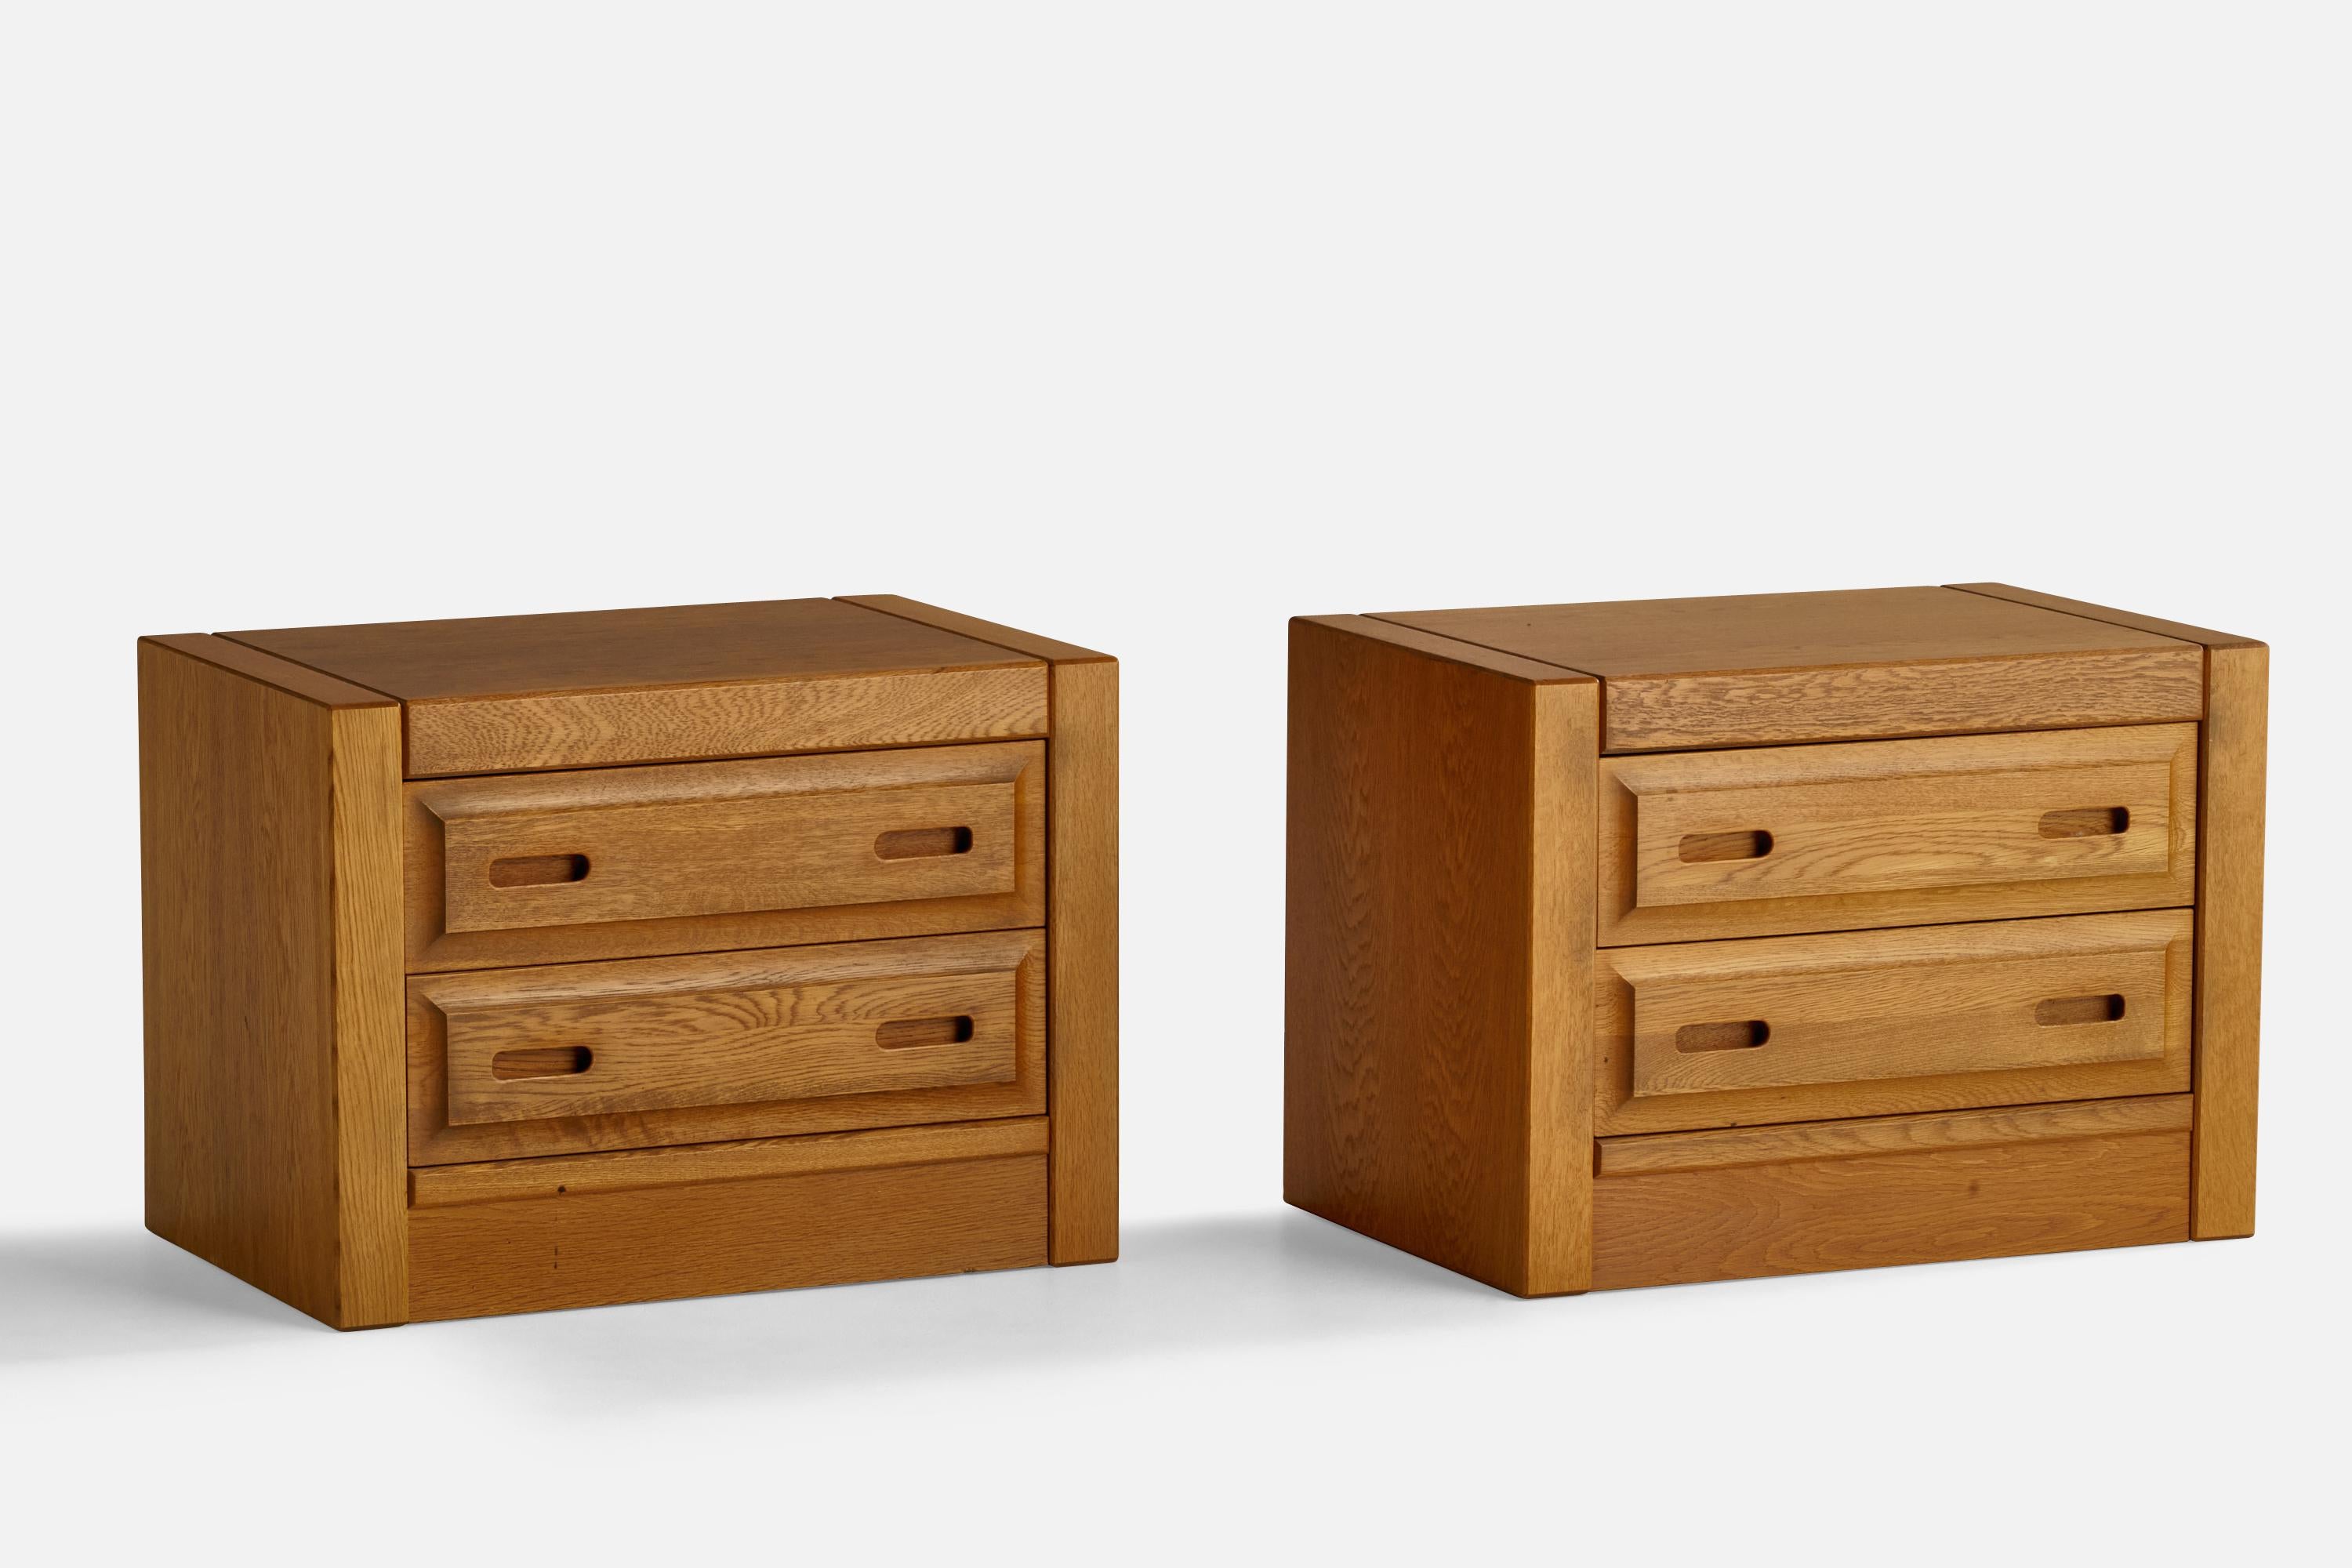 A pair of oak nightstands or bedside cabinets designed and produced in Denmark, 1950s.

Backsides are stamped 